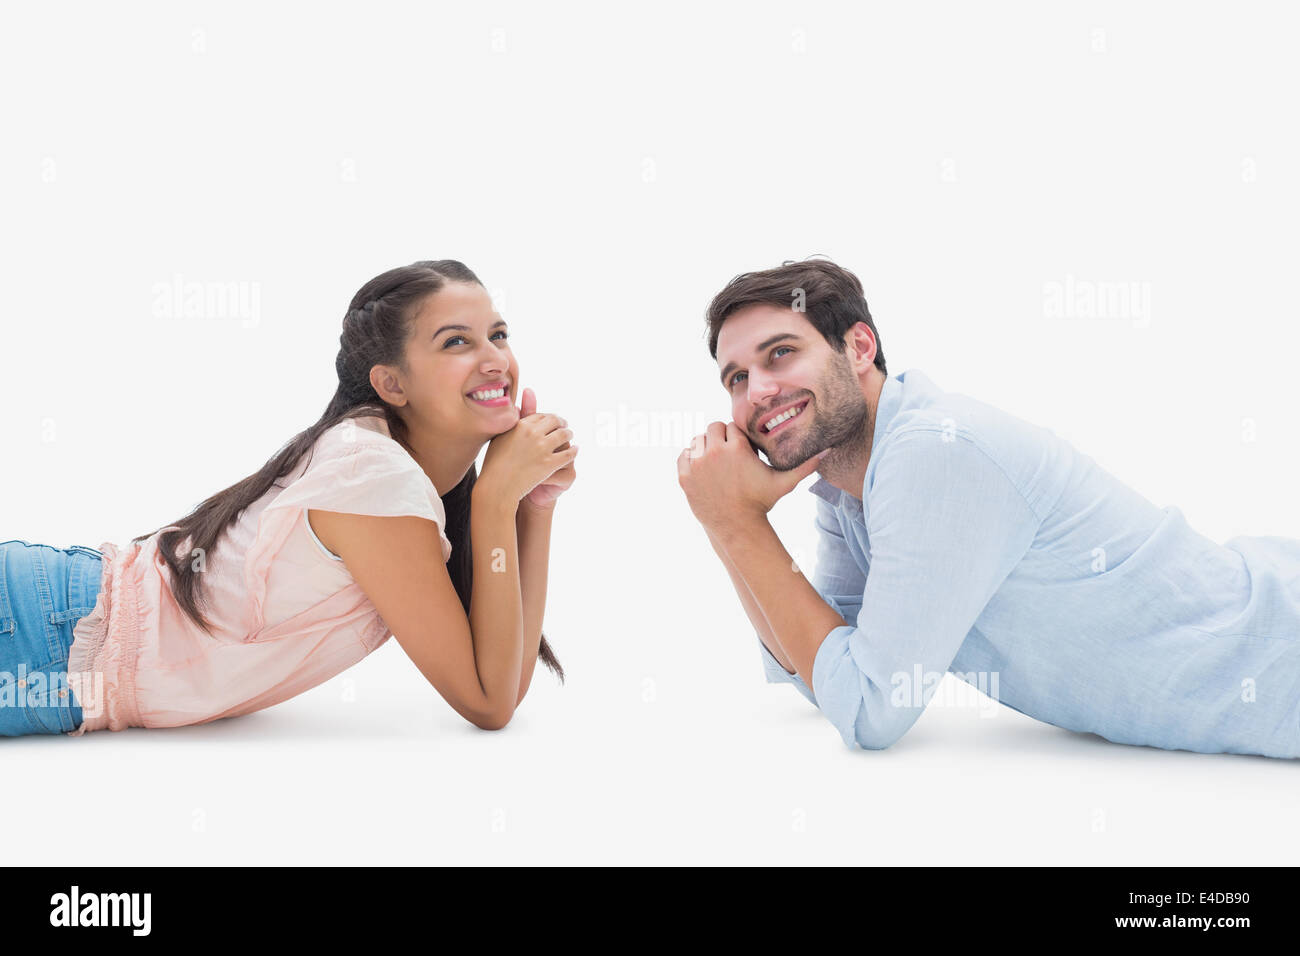 Attractive young couple looking up Banque D'Images